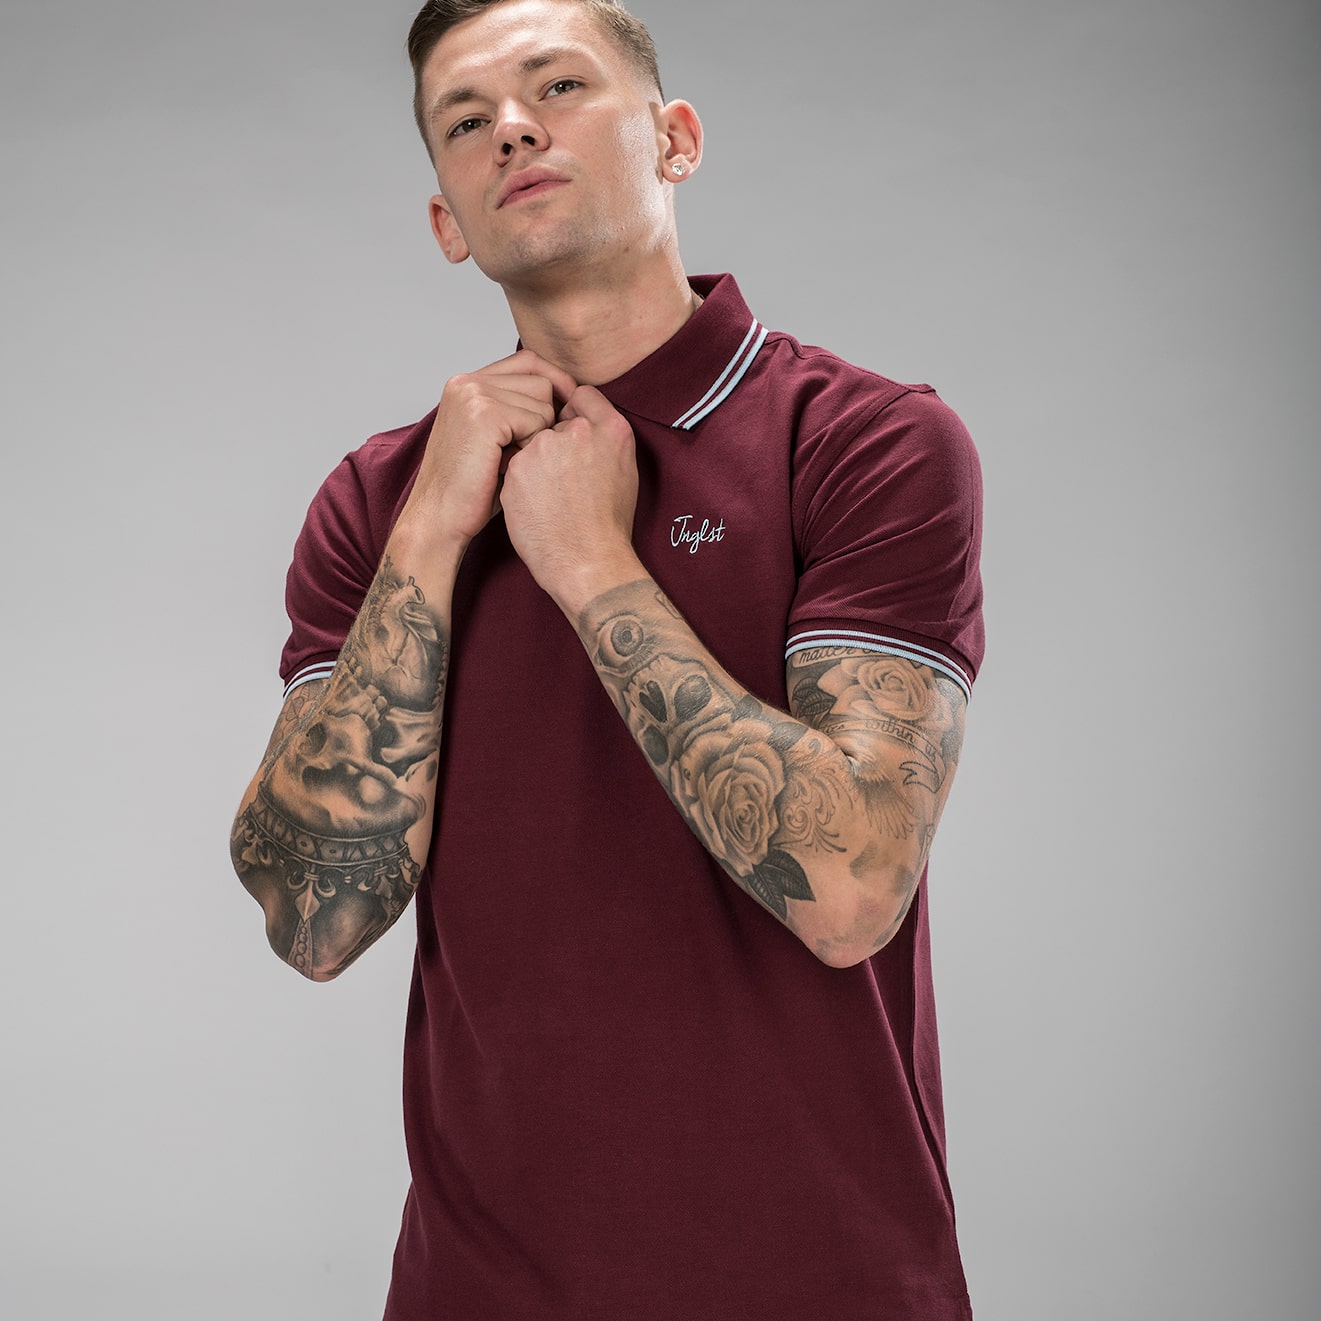 Burgundy Polo Shirt by Jnglst Clothing